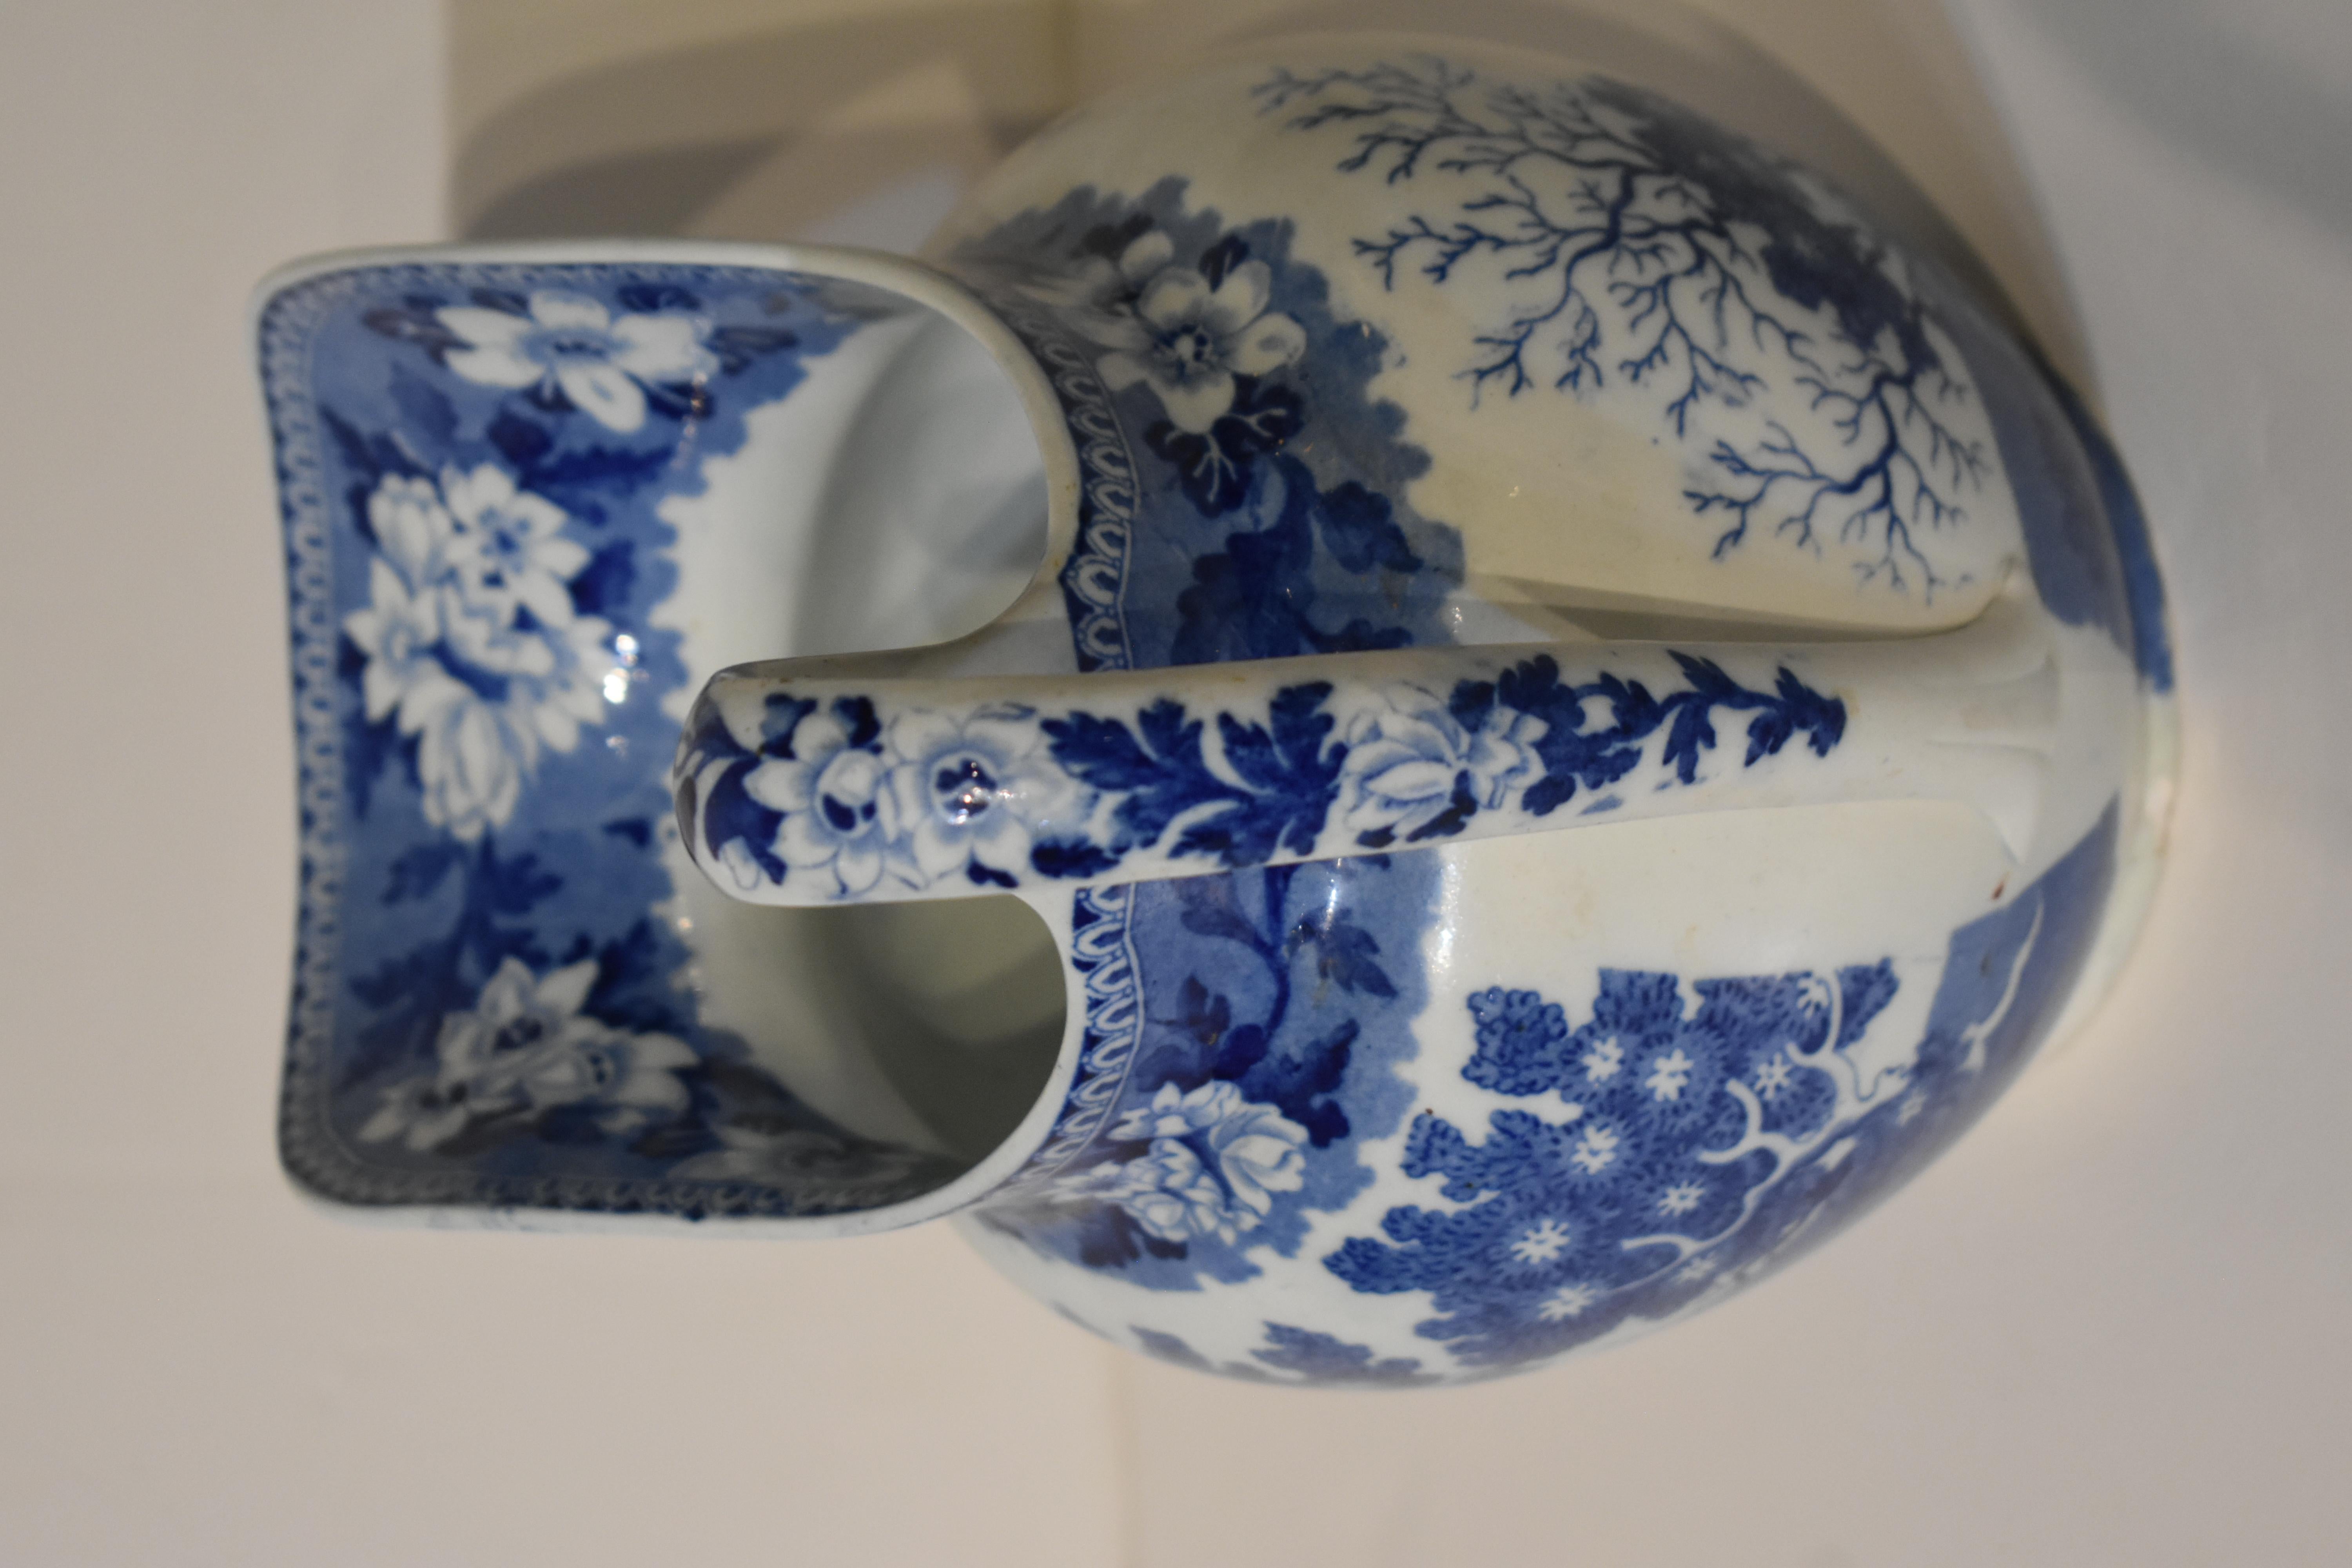 Chinoiserie Historical Staffordshire Blue and White Pottery Pitcher circa 1845